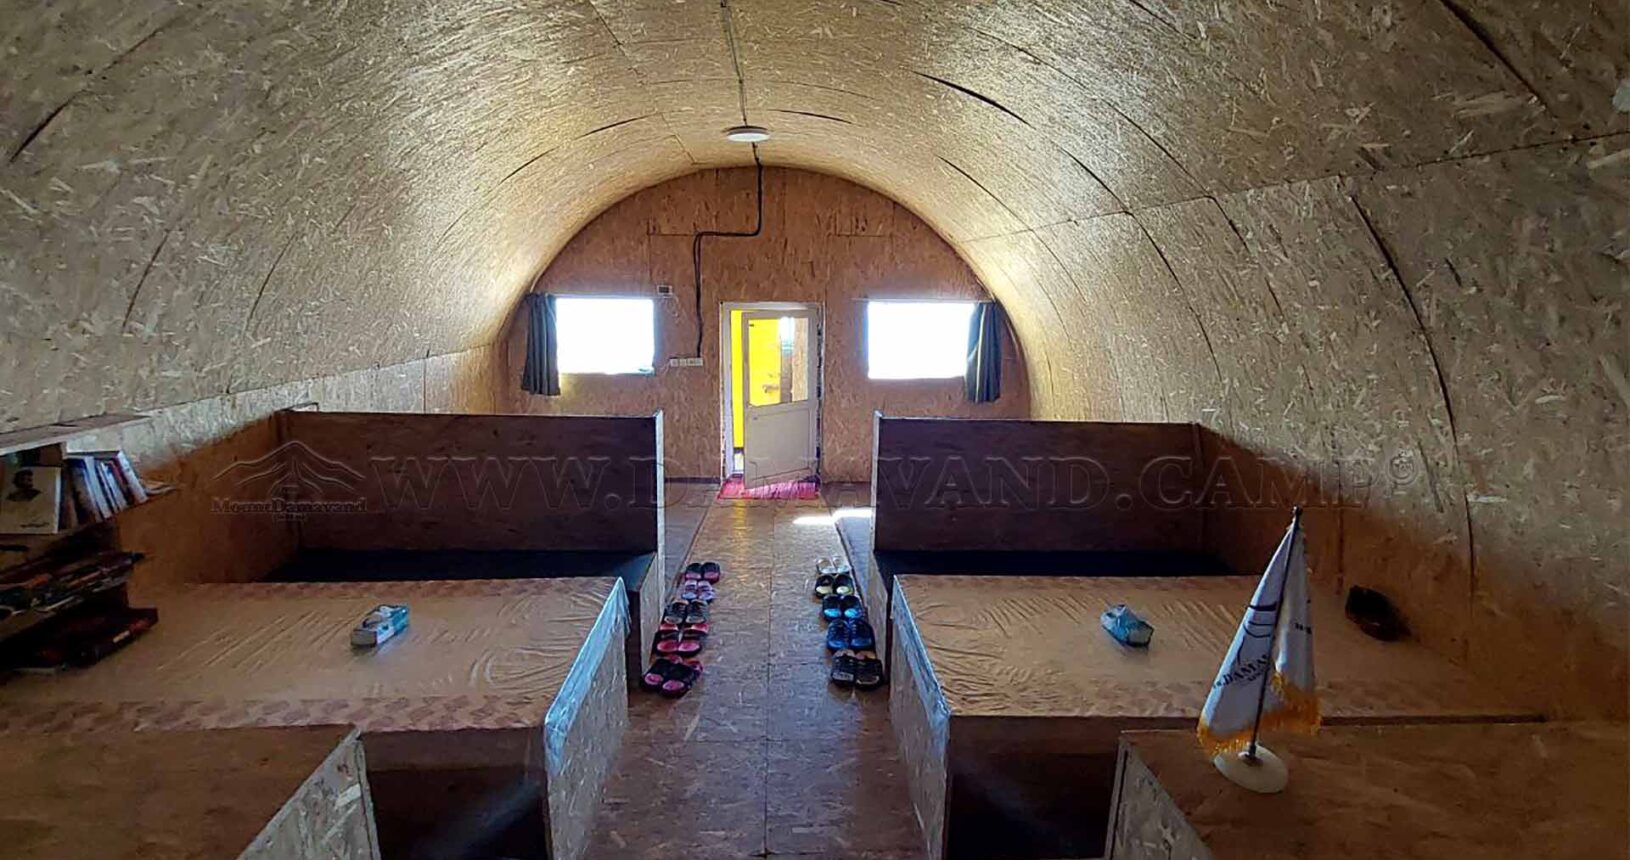 Inside view: A peek into the old hut at Camp 3 of Damavand.